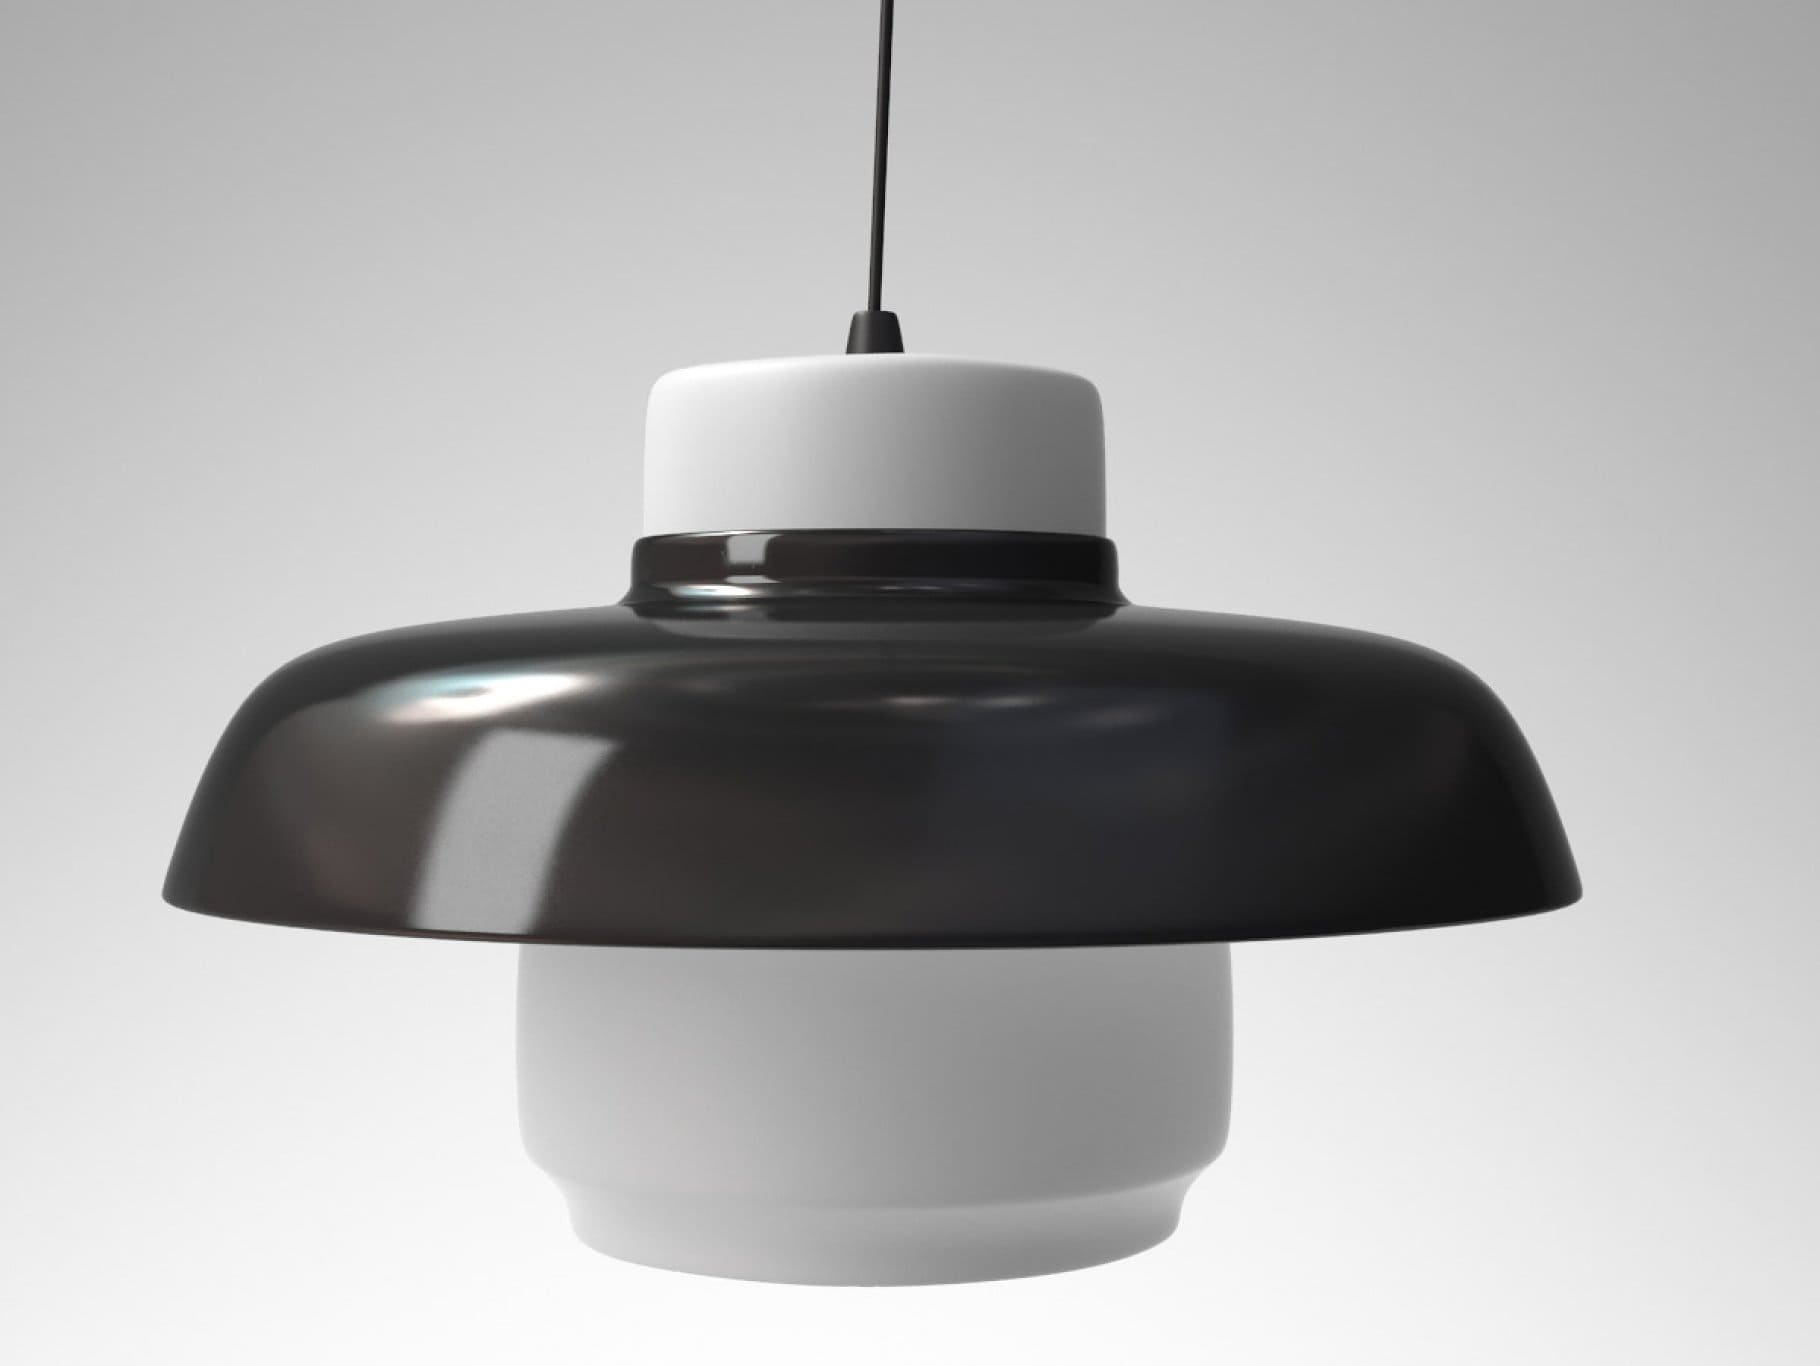 A wide black and white Lento lamp with a snow-white center.